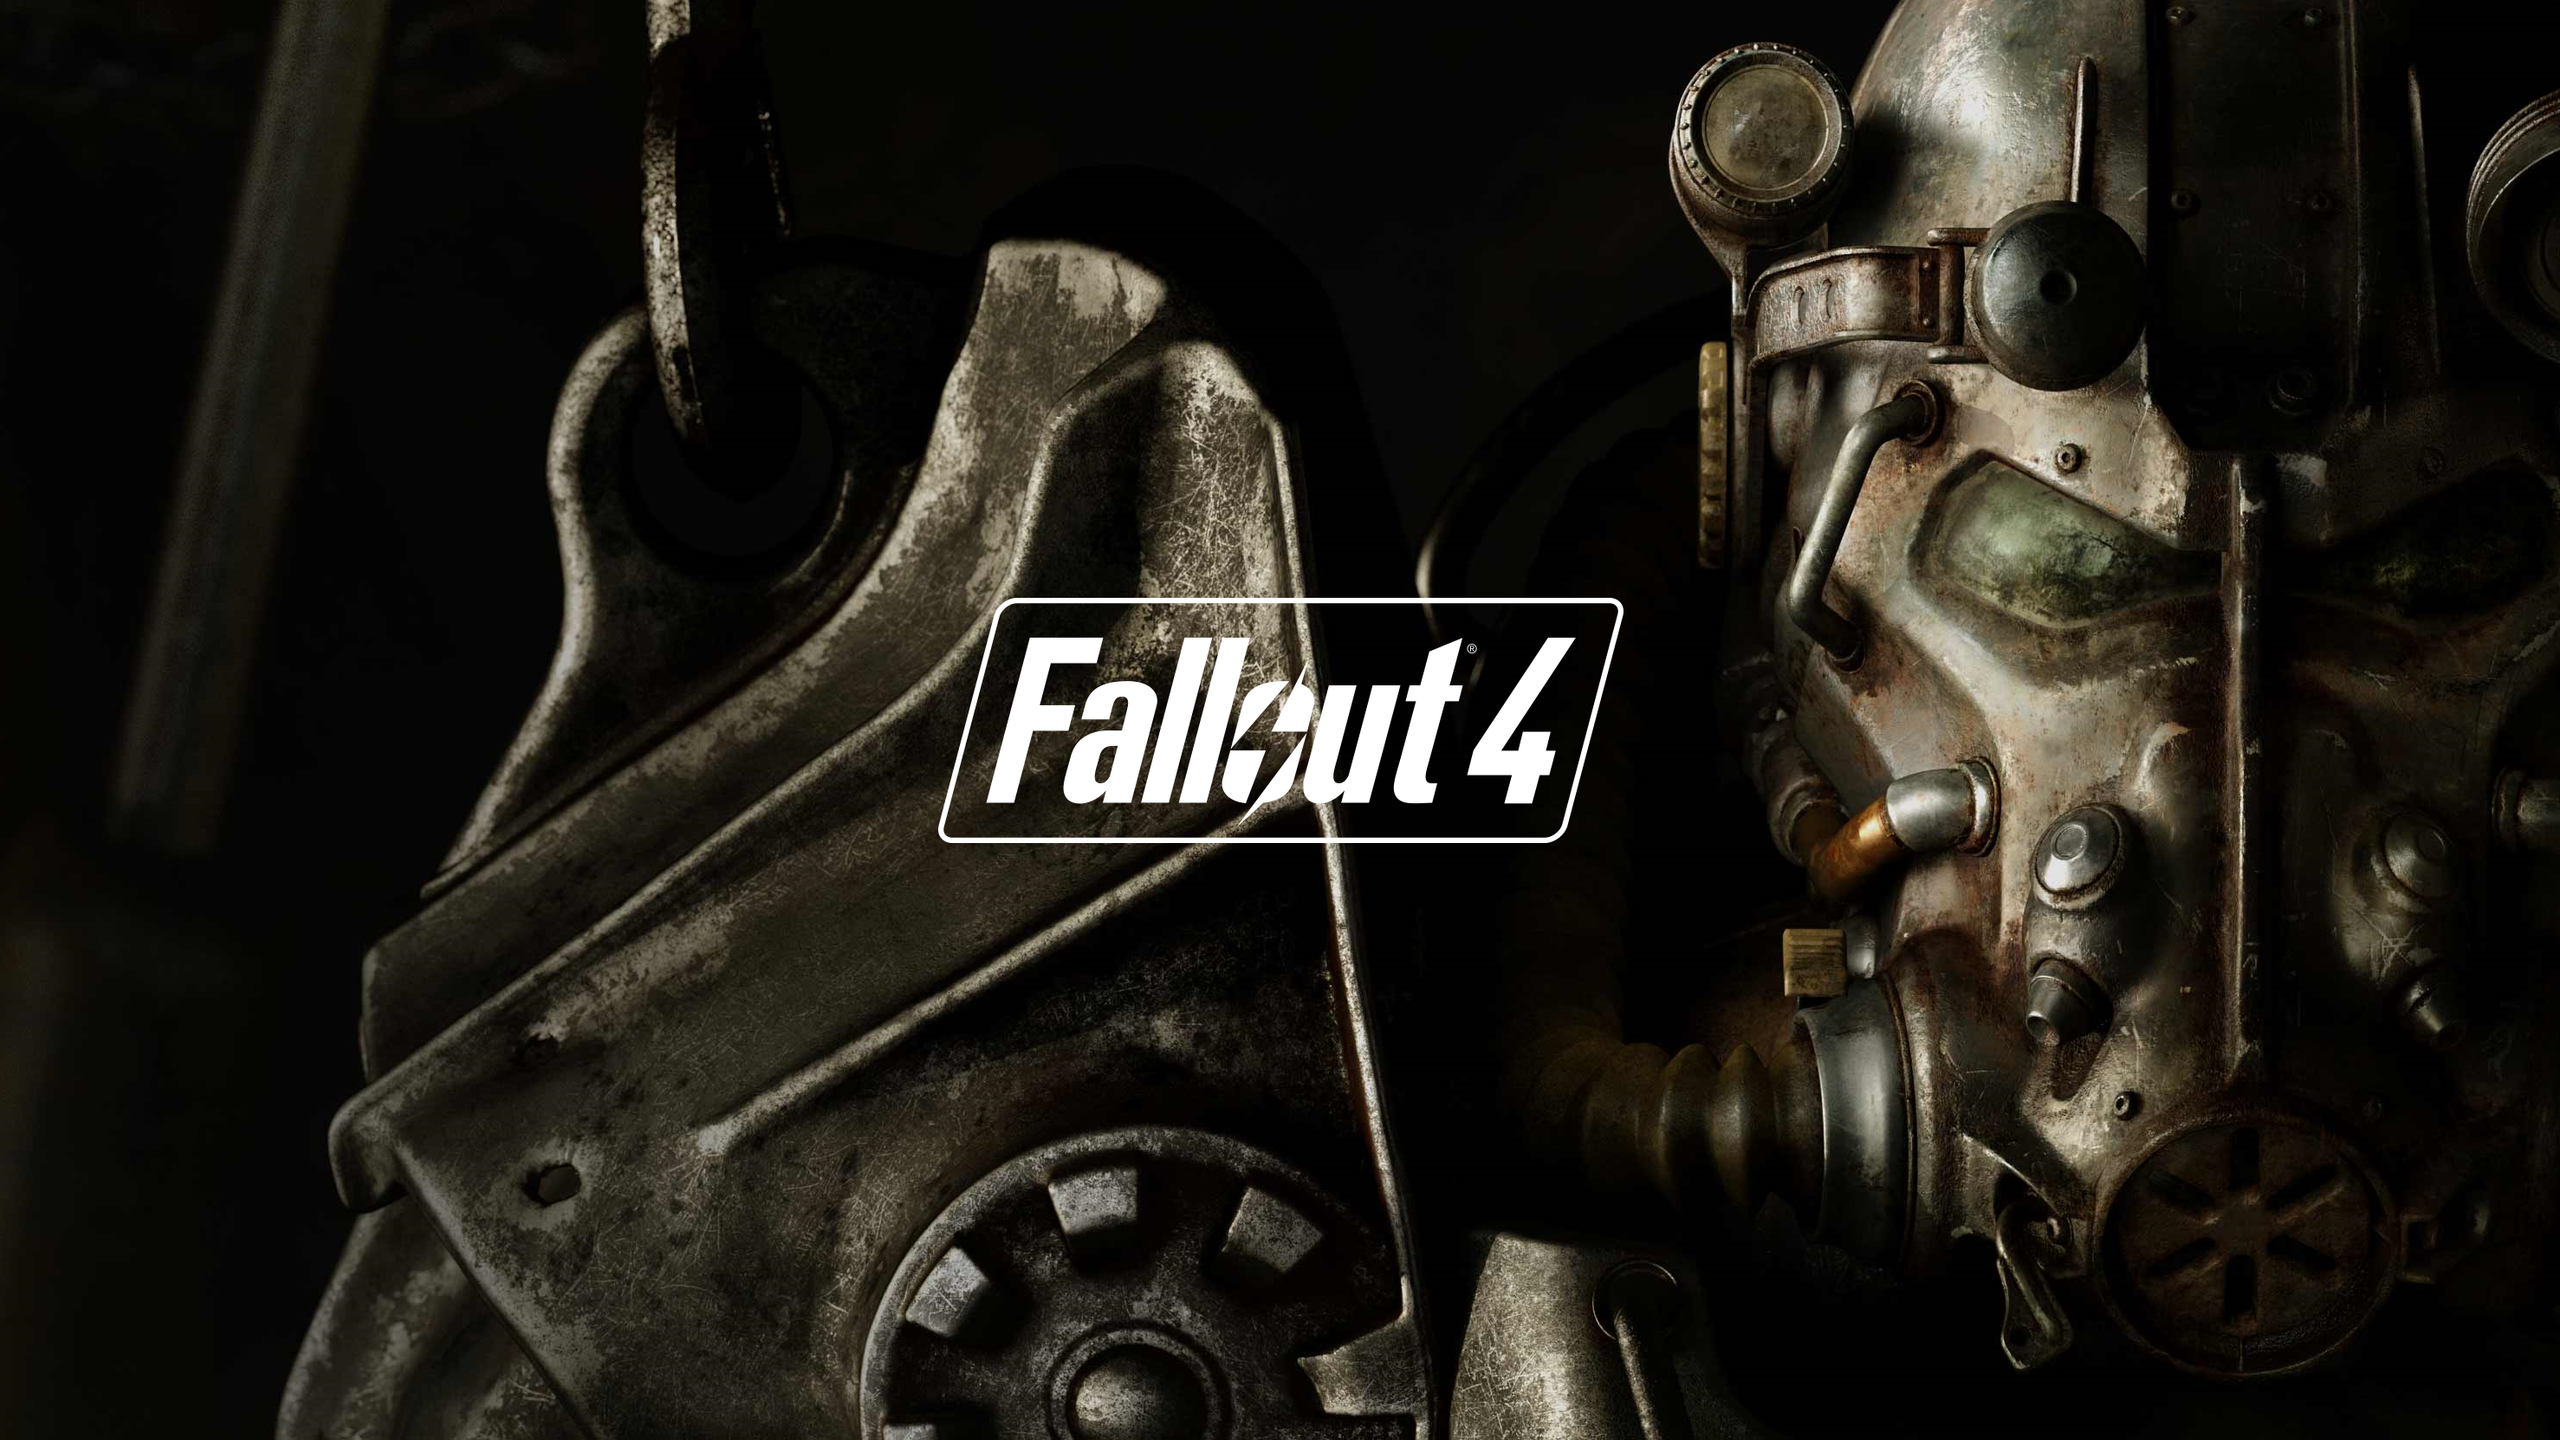 Fallout 4 Game for 2560x1440 HDTV resolution